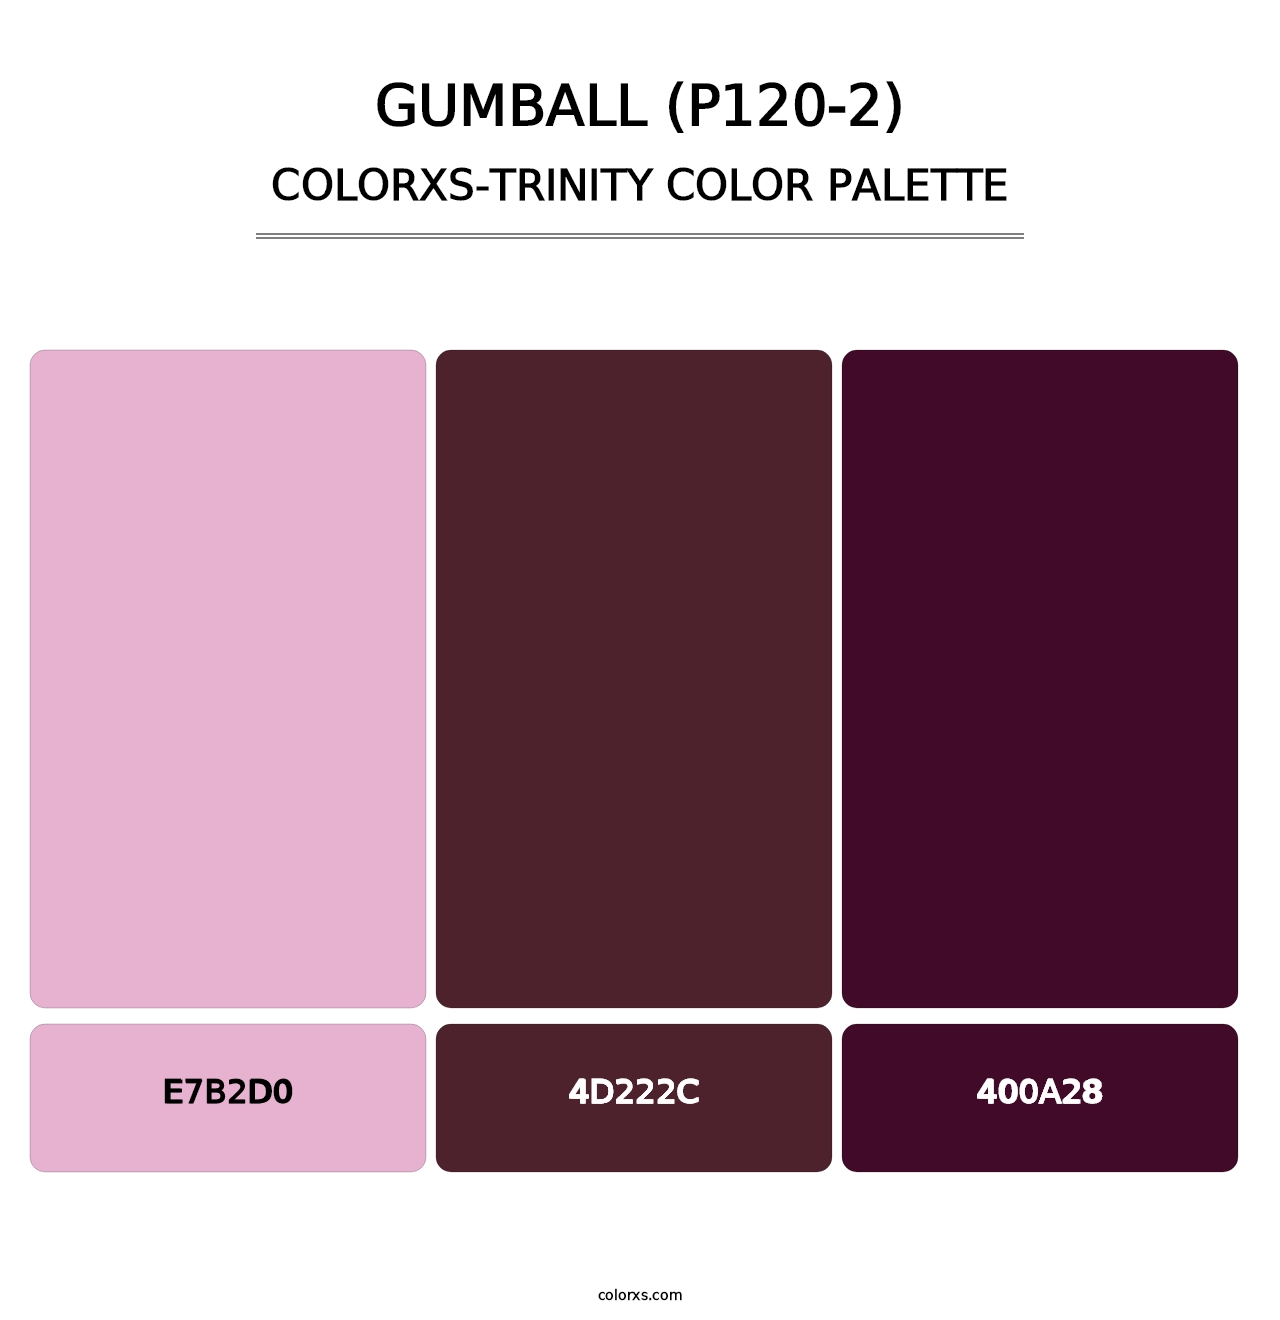 Gumball (P120-2) - Colorxs Trinity Palette